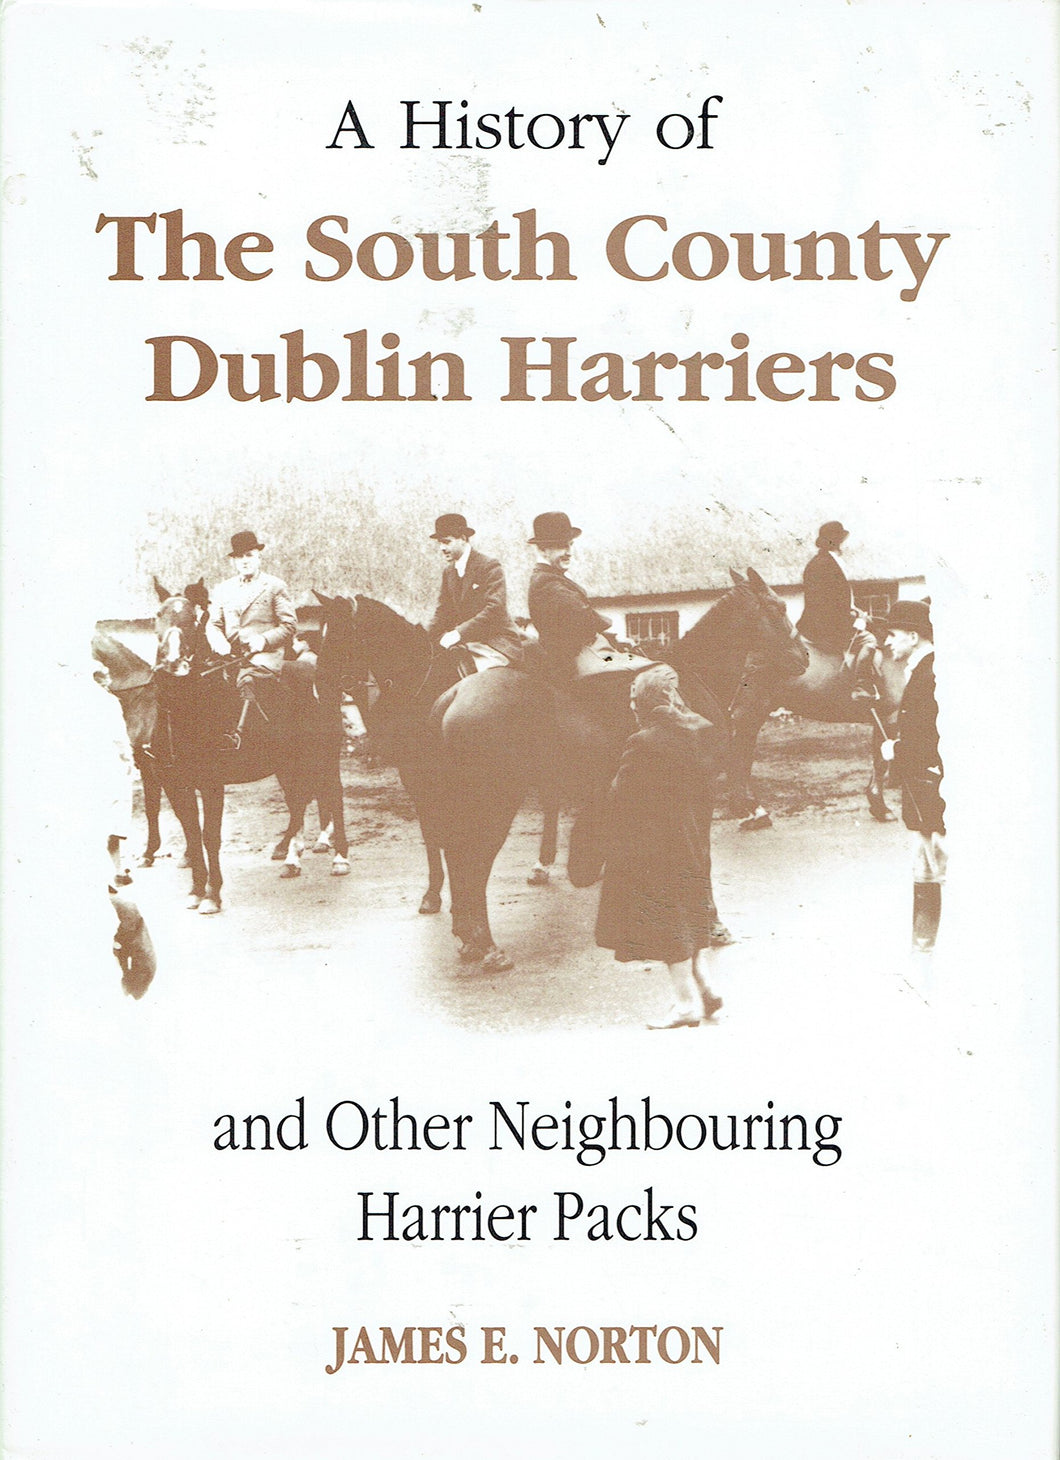 A History of the South County Dublin Harriers and Other Neighbouring Harrier Packs